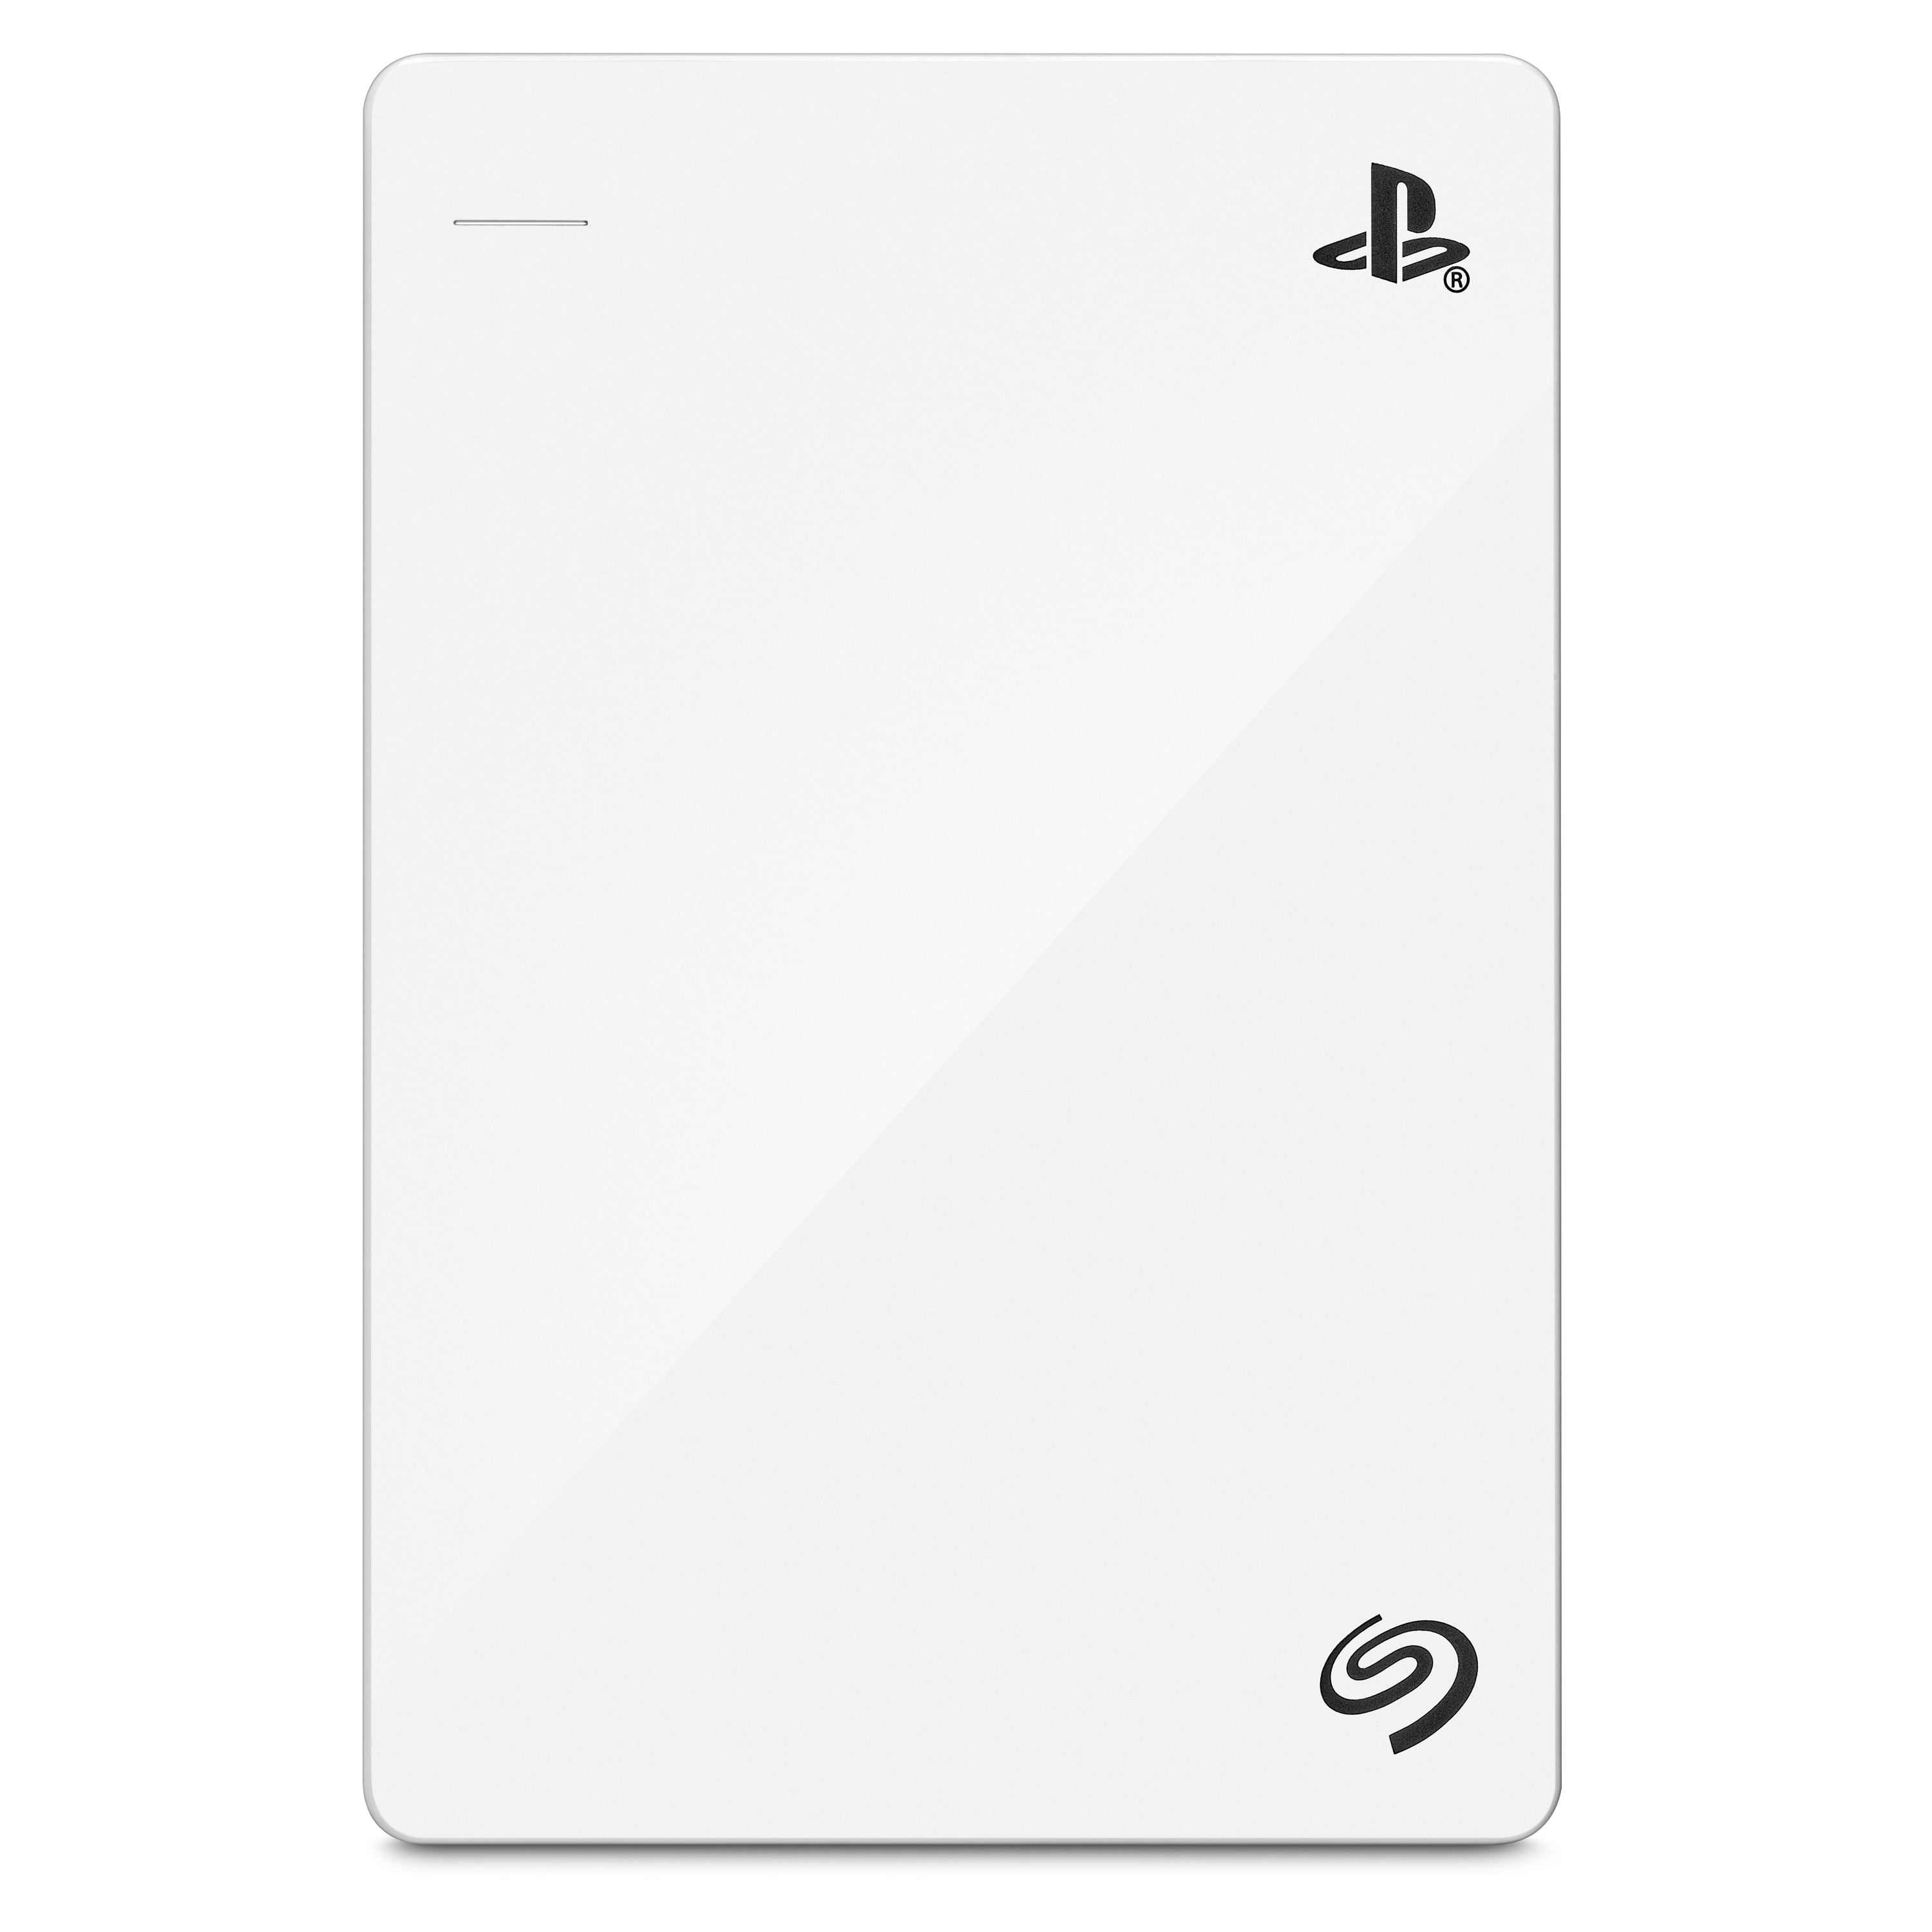 Siege kommentator Literacy Seagate Game Drive for PlayStation Consoles 4TB External Portable Hard  Drive USB 3.0 Officially Licensed - White - Walmart.com